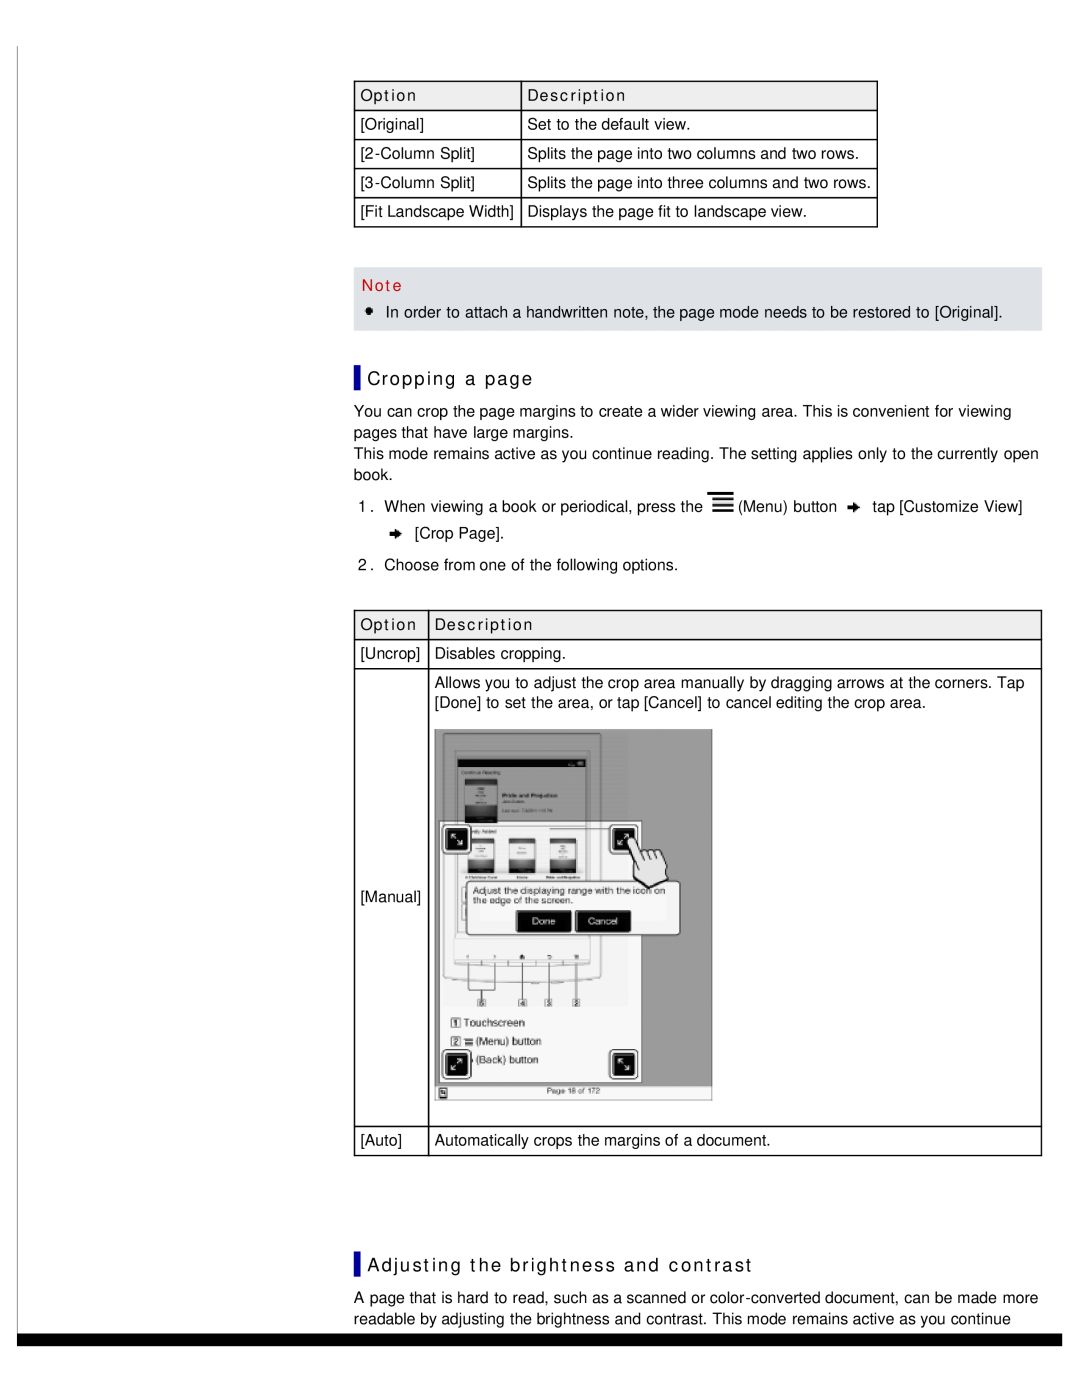 Sony PRS-T1WC, PRS-T1RC manual Cropping a page, Adjusting the brightness and contrast, Option Description 